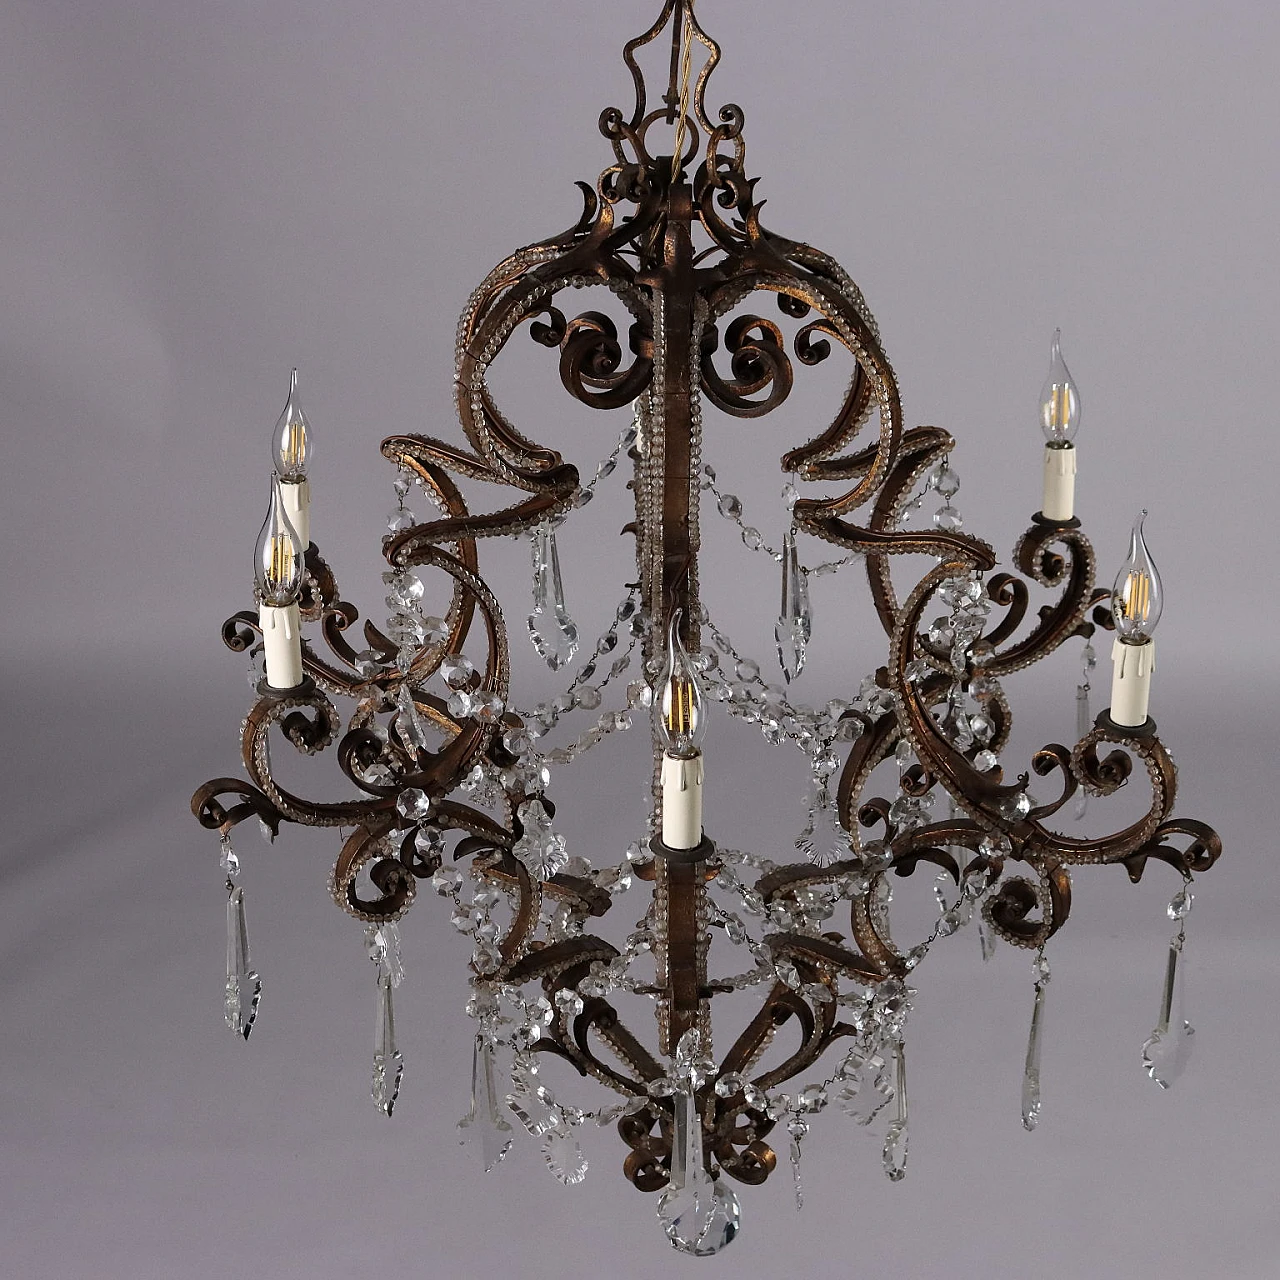 Six-light gilded wrought iron & glass chandelier, 19th century 5